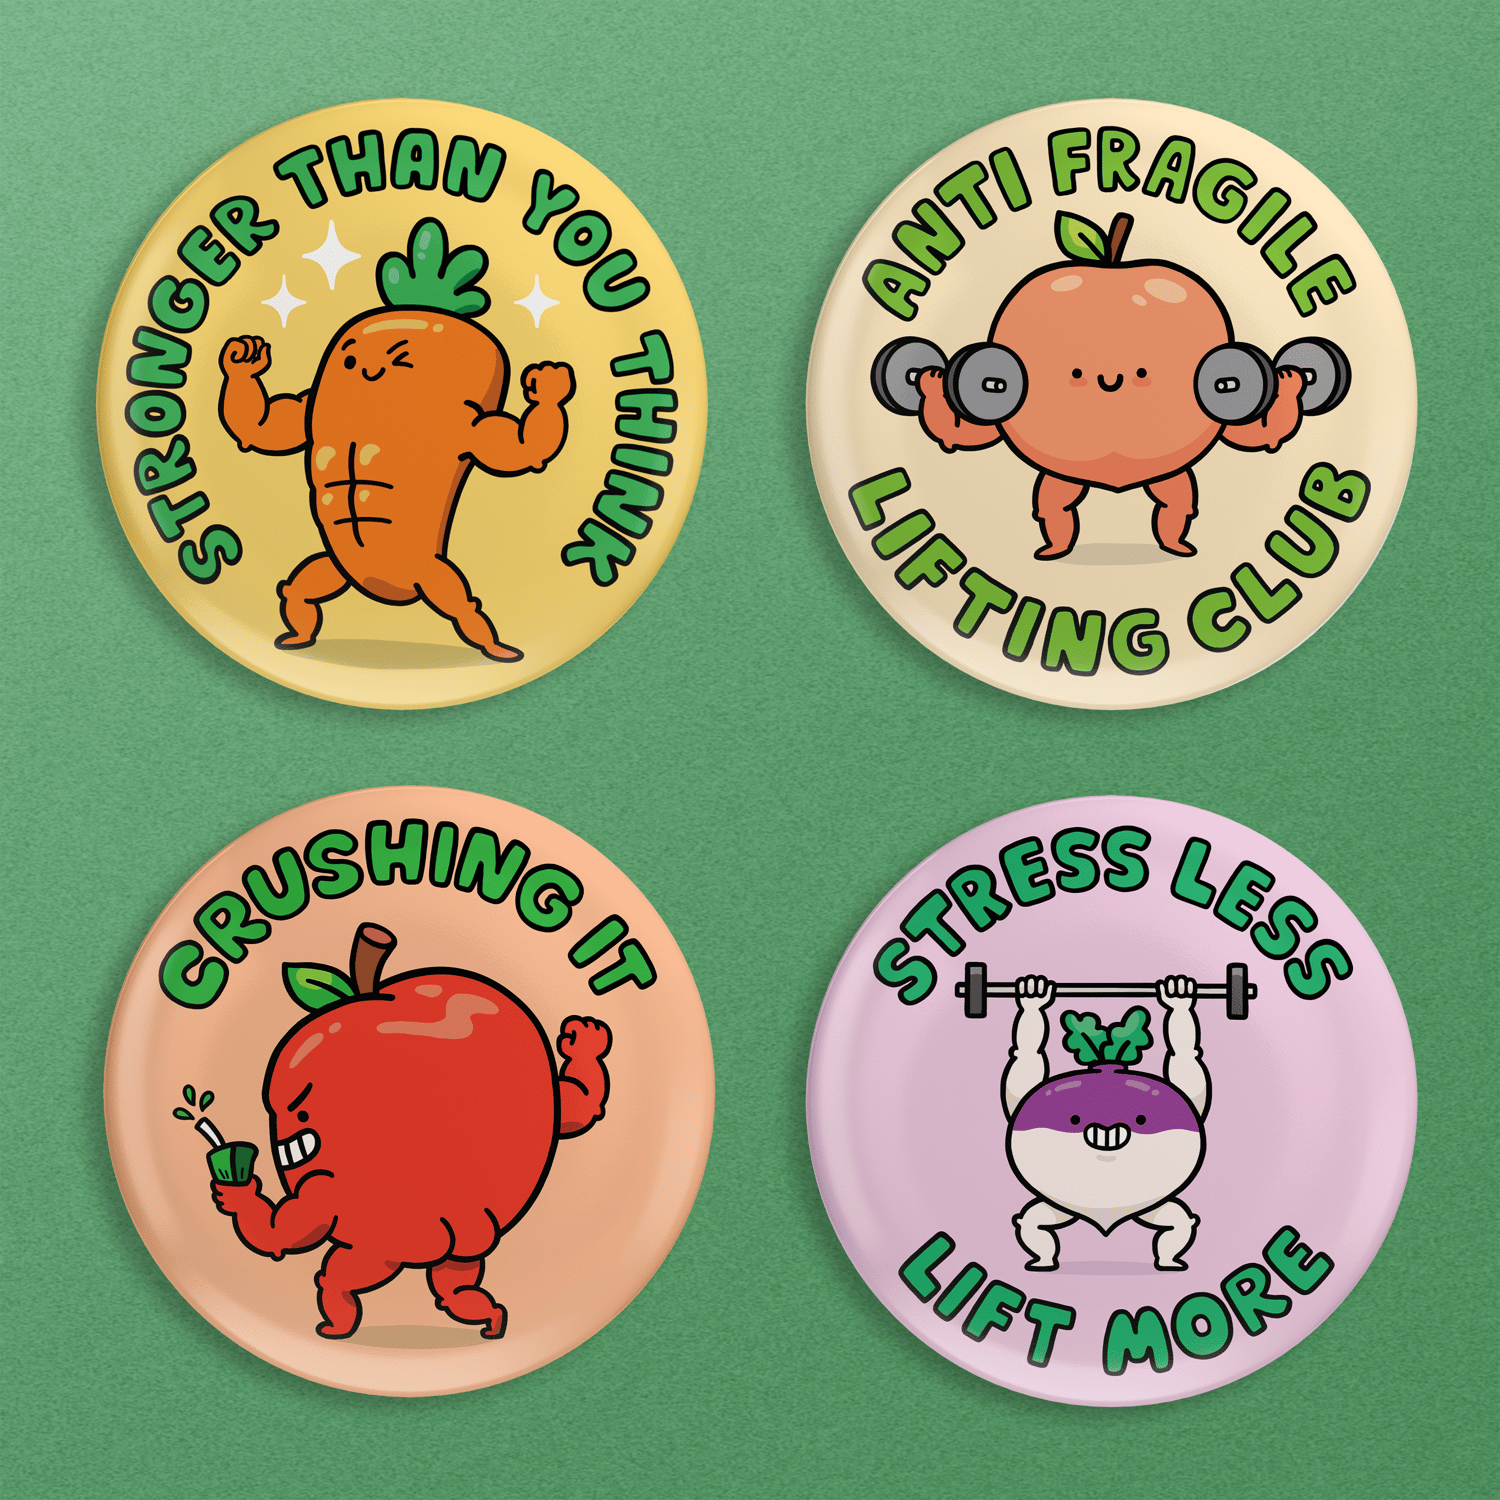 Hench Fruit and Veggies Badges